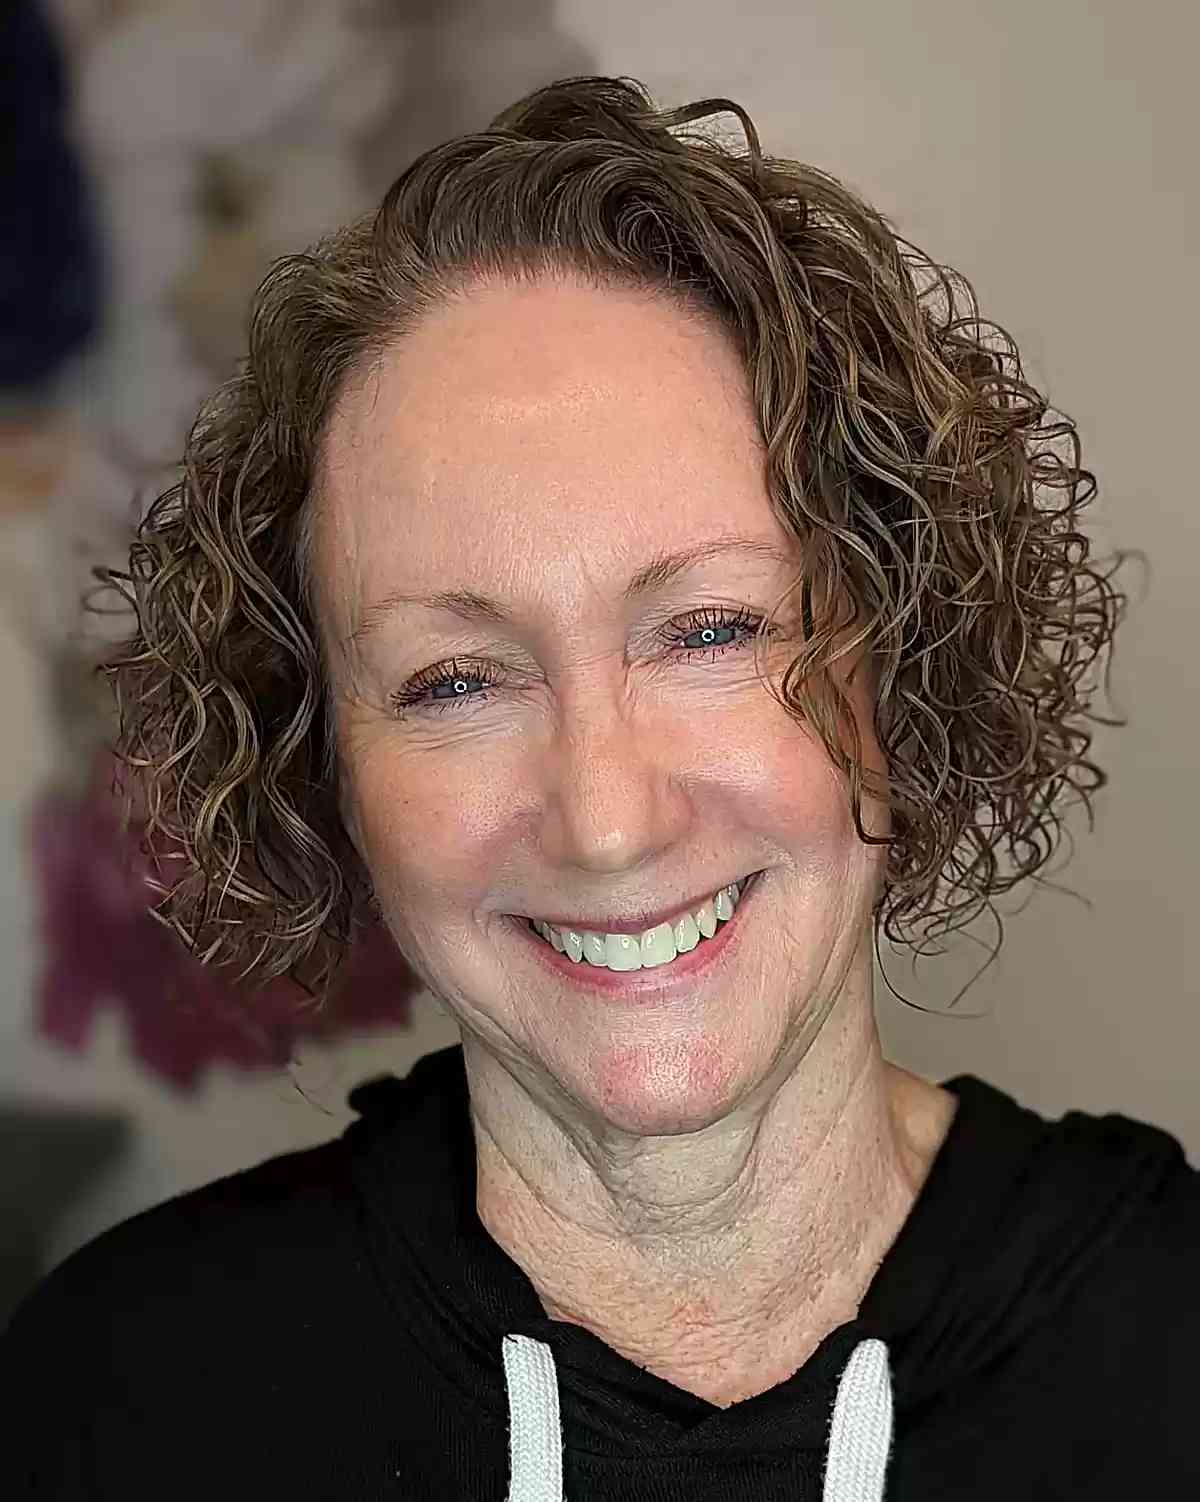 No-Bangs Permed Curls on Jaw-Length Haircut for Women Over 60